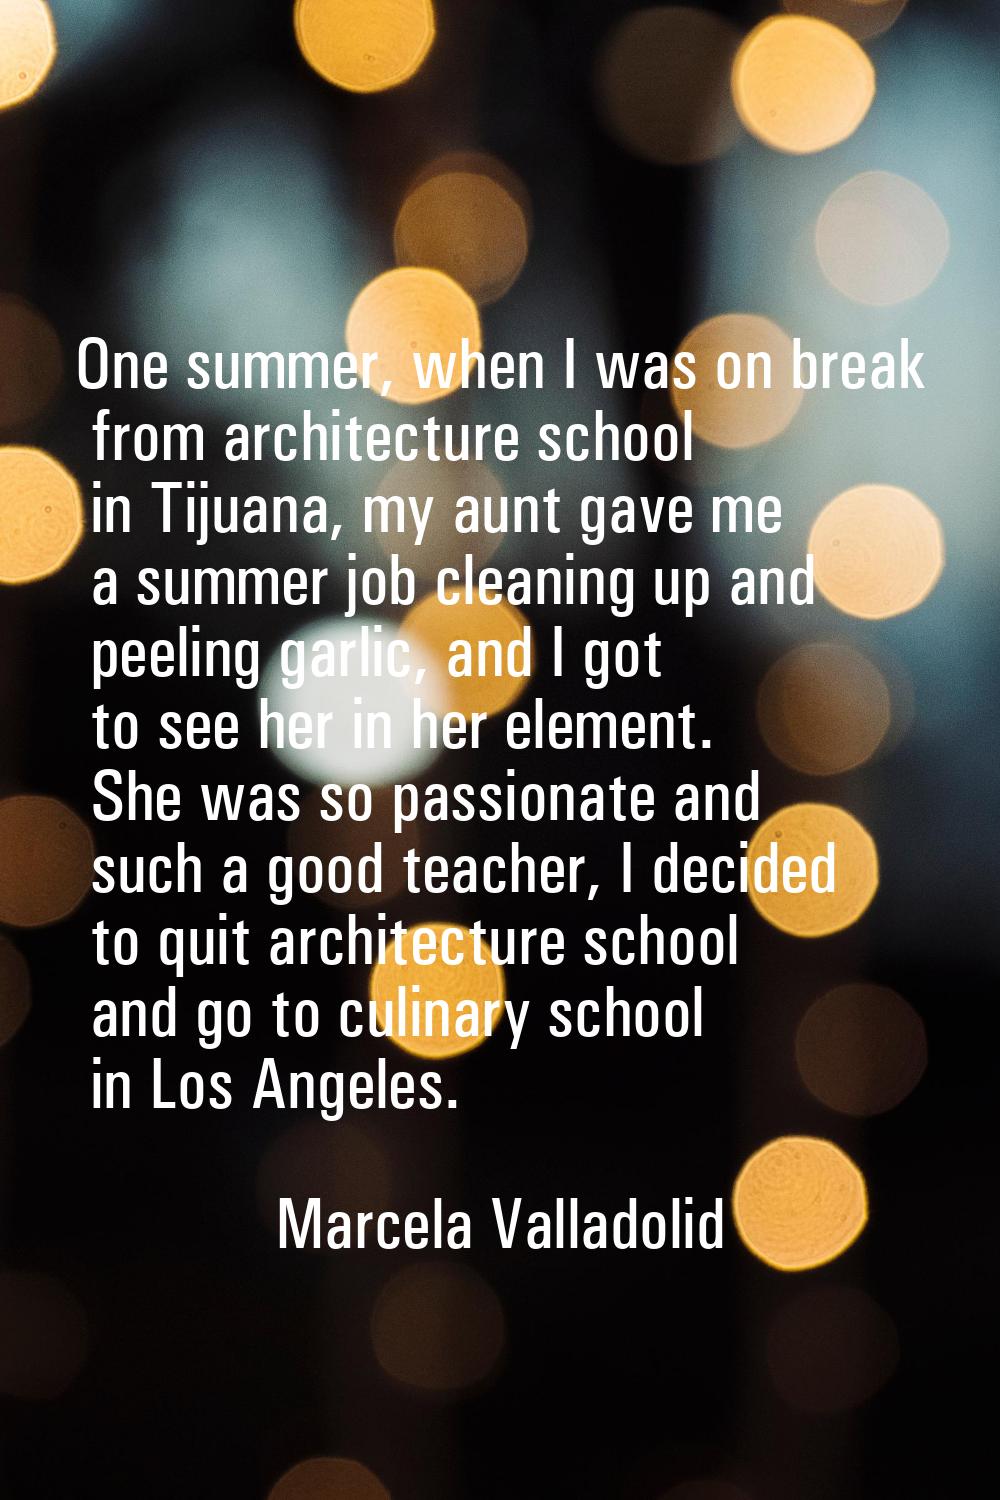 One summer, when I was on break from architecture school in Tijuana, my aunt gave me a summer job c